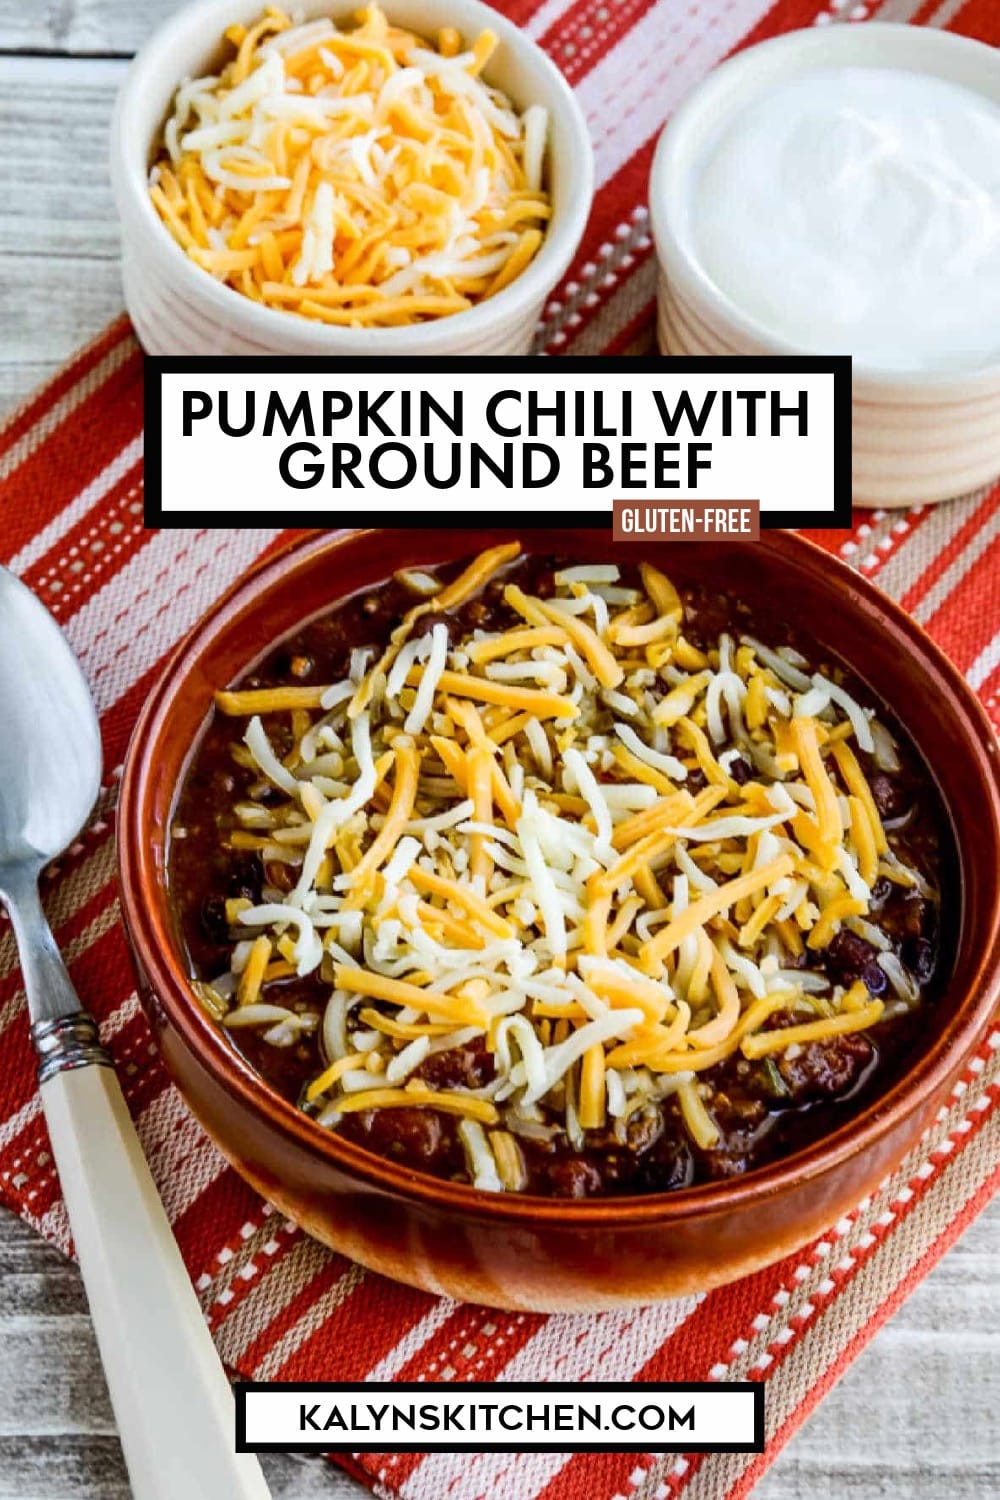 Pinterest image of Pumpkin Chili with Ground Beef